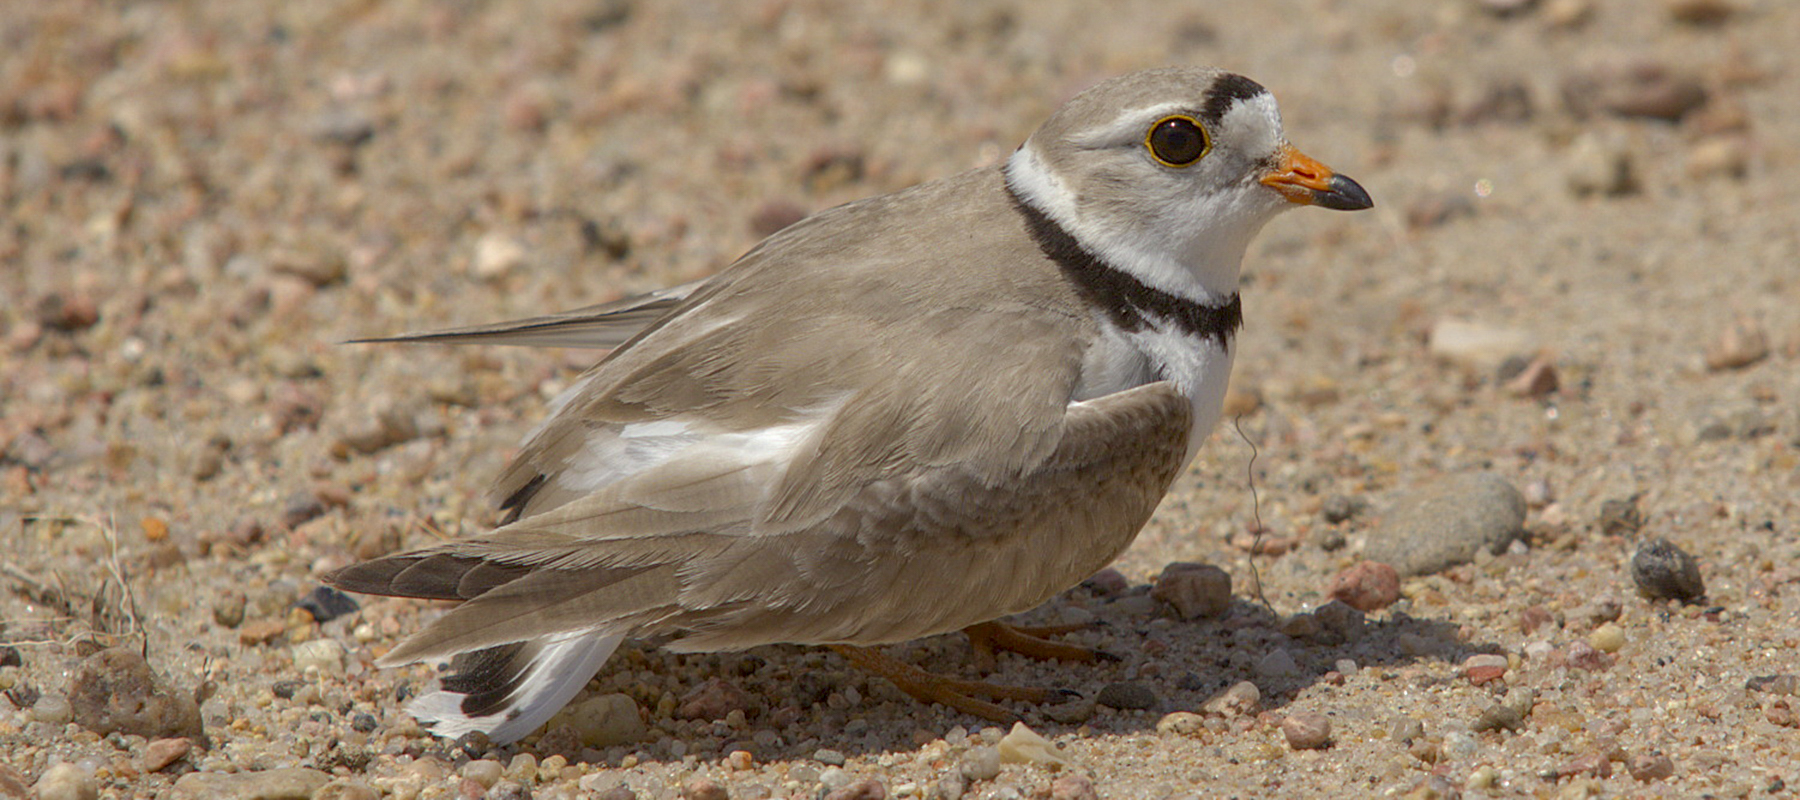 Image of piping plover